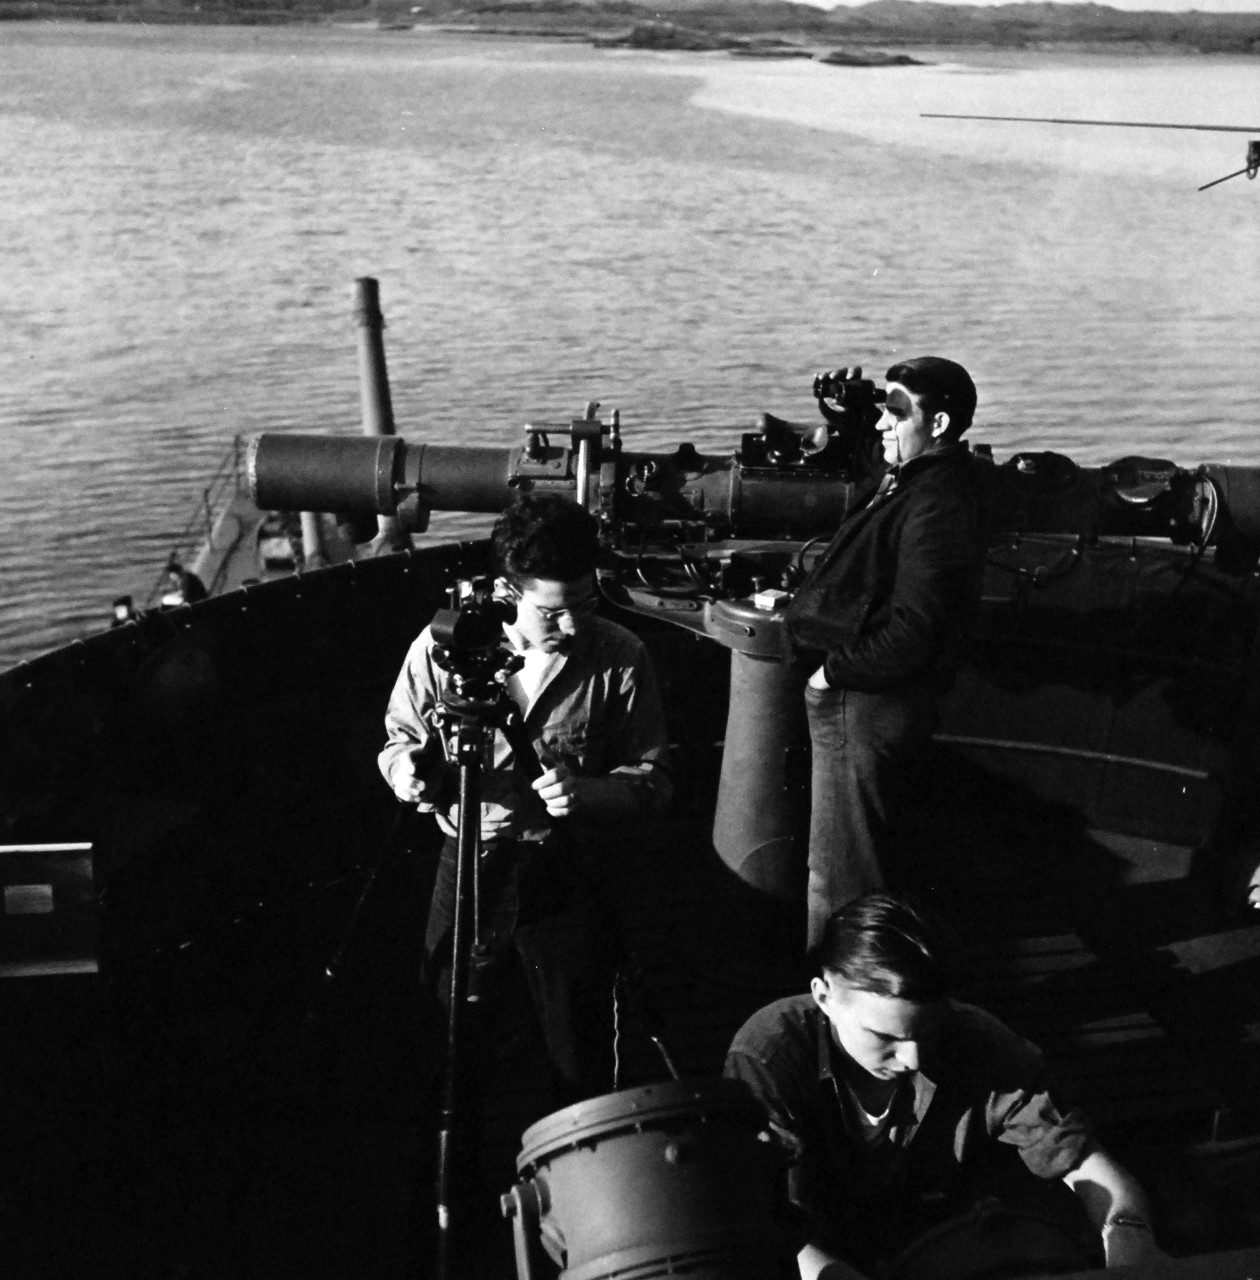 80-G-475668:  Aleutian Islands Campaign, June 1942 - August 1943.  Battle of Attu, May 11-29, 1943.  Aerologists aboard USS Casco (AVP-12) at Attu take reading with Theodolite.  Photographed released by the Steichen Photographic Unit:  Lieutenant Commander Horace Bristol, July 1943.    TR-5311.    U.S. Navy photograph, now in the collections of the National Archives.  (2015/11/17).